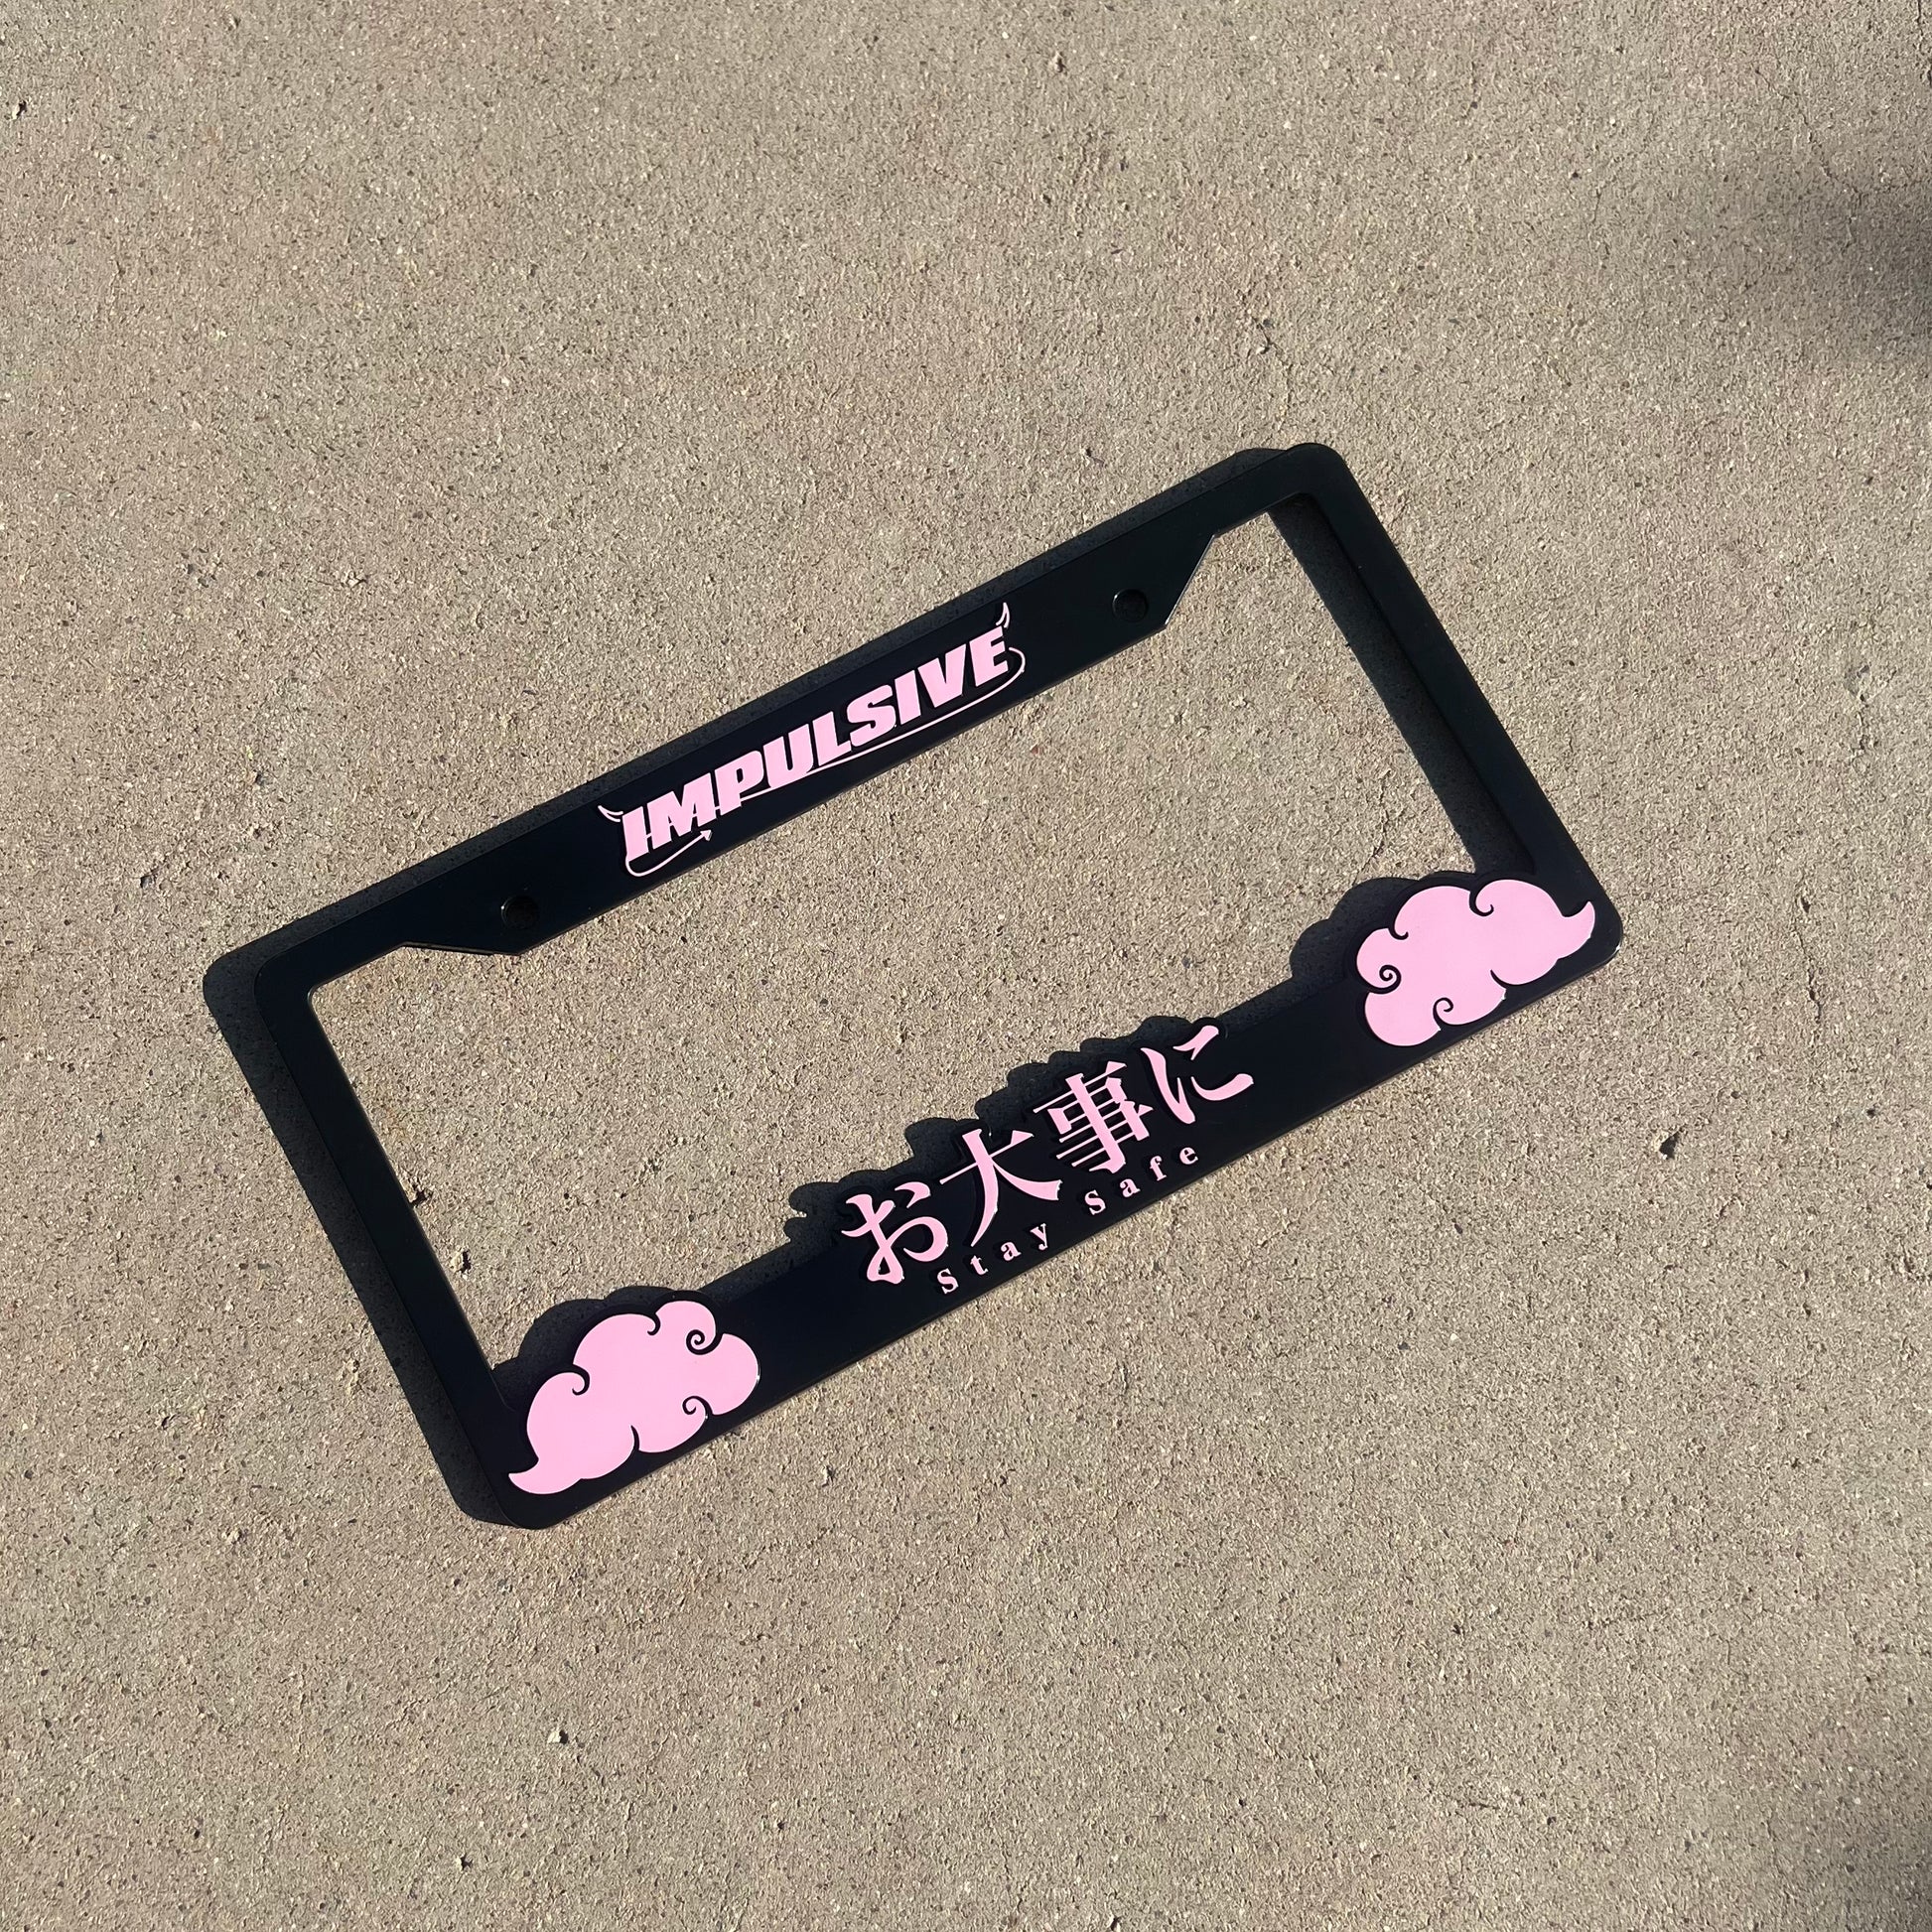 Japanese anime inspired plastic custom License Plate Frame. Top has Impulsive logo and the bottom has japanese characters and english translated to stay safe surrounding with japanese clouds. Asian inspired. Black Frame with pink lettering.